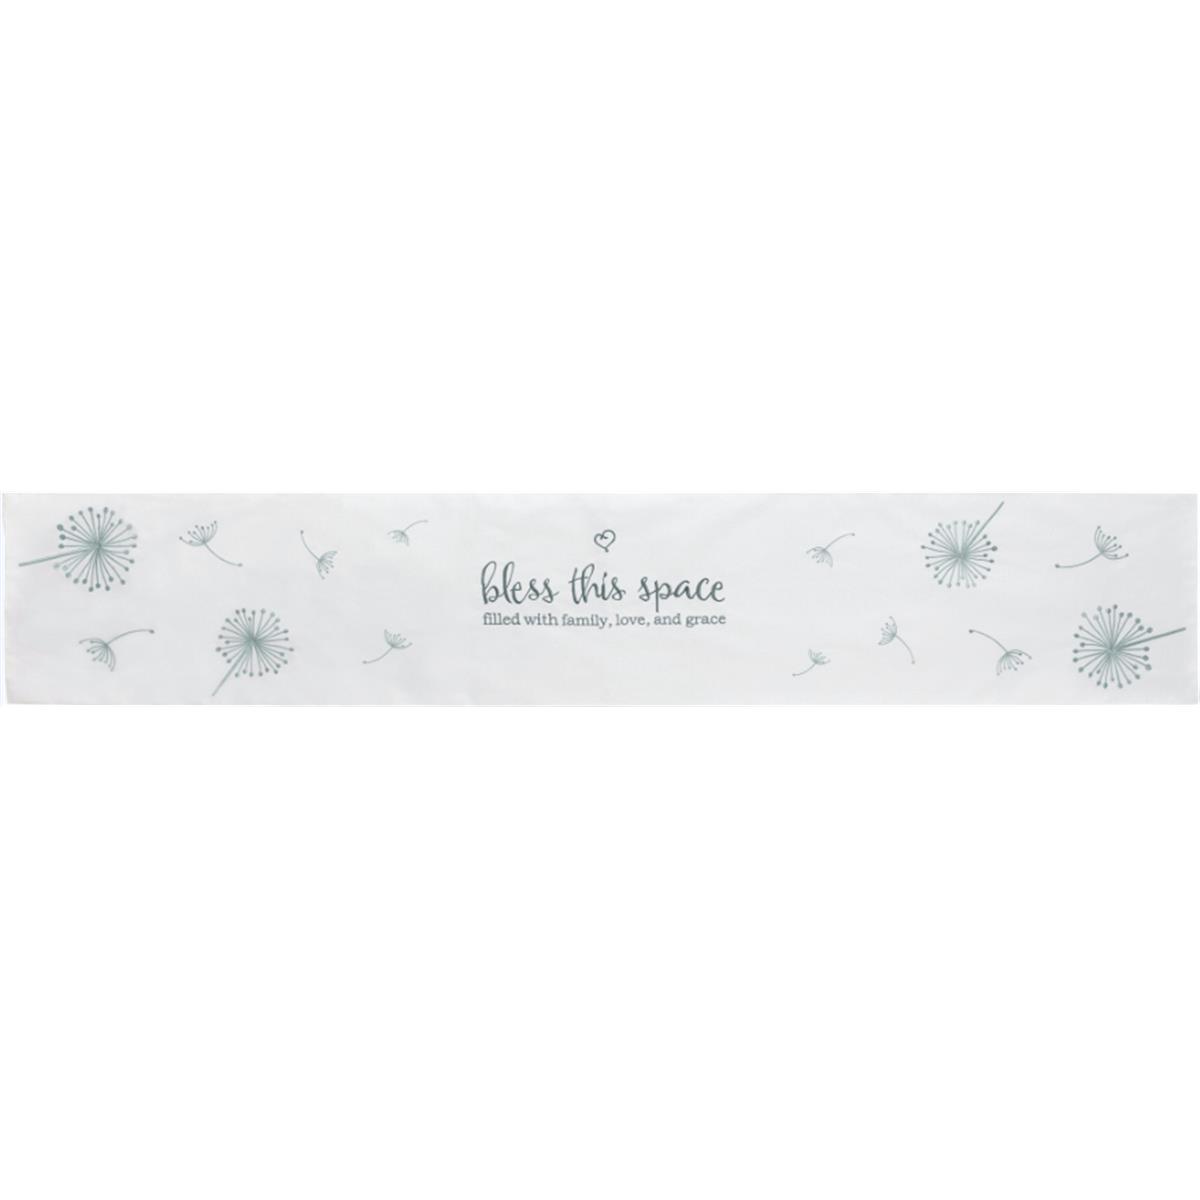 Picture of Precious Moments 139536 Bless This Space Filled with Family Love & Grace Table Runner - 72 x 13 in.